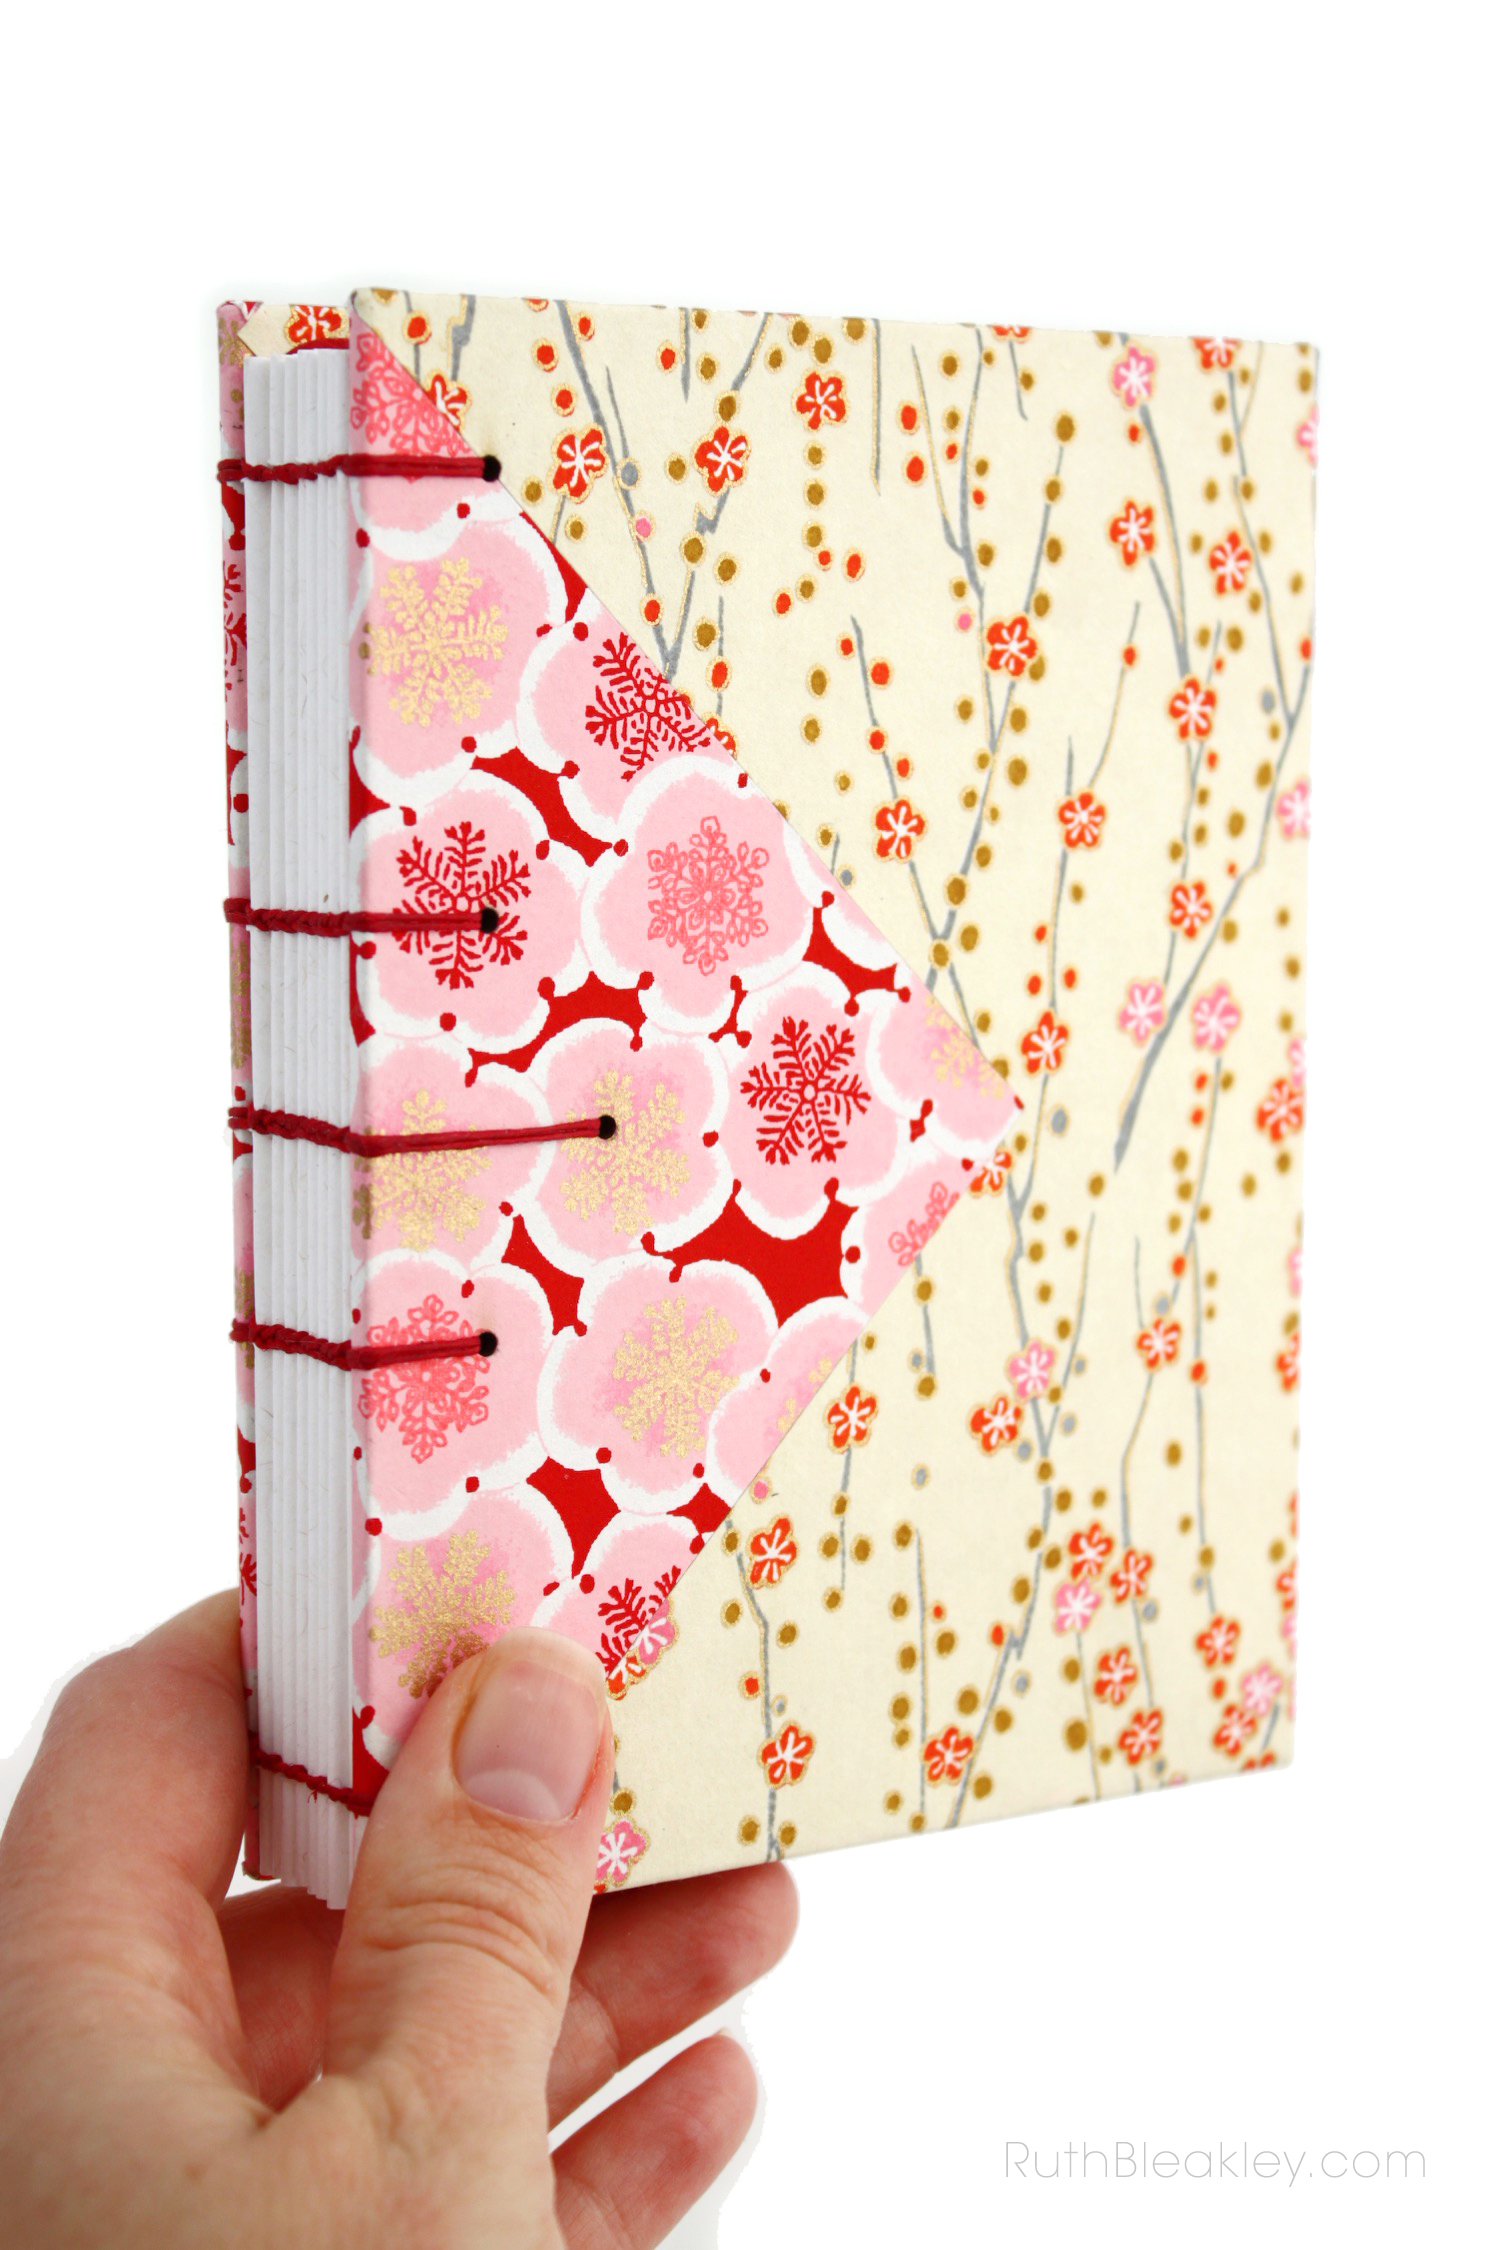 Cherry Blossom and Plum Blossom Twin Journals handmade by book artist Ruth Bleakley